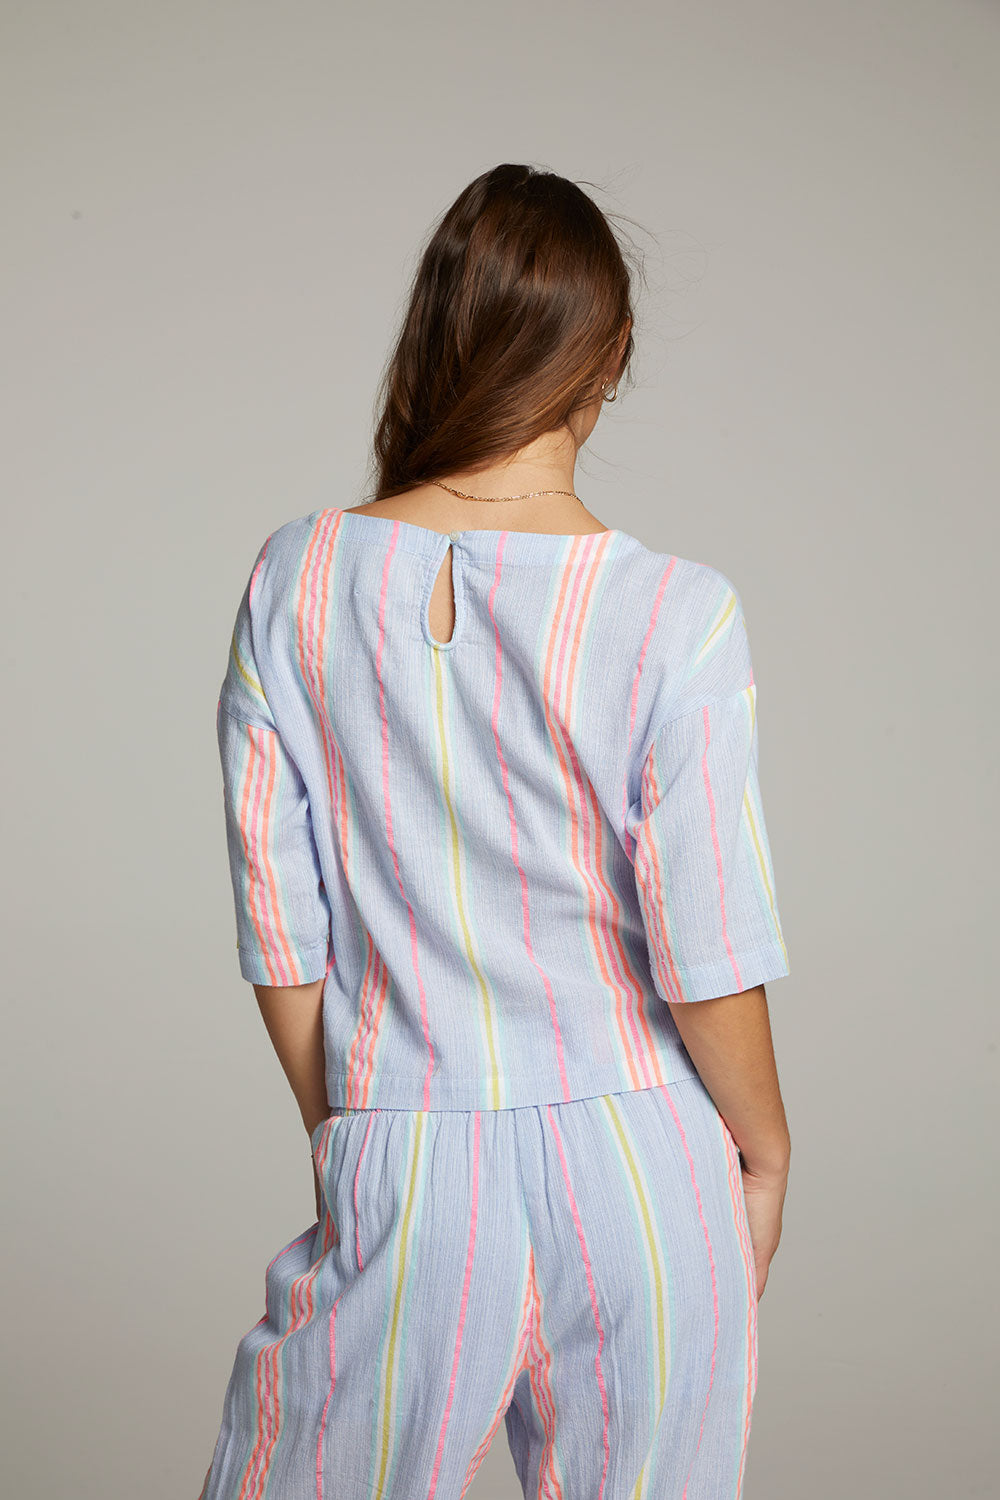 Martine South West Beach Stripe Blouse WOMENS chaserbrand